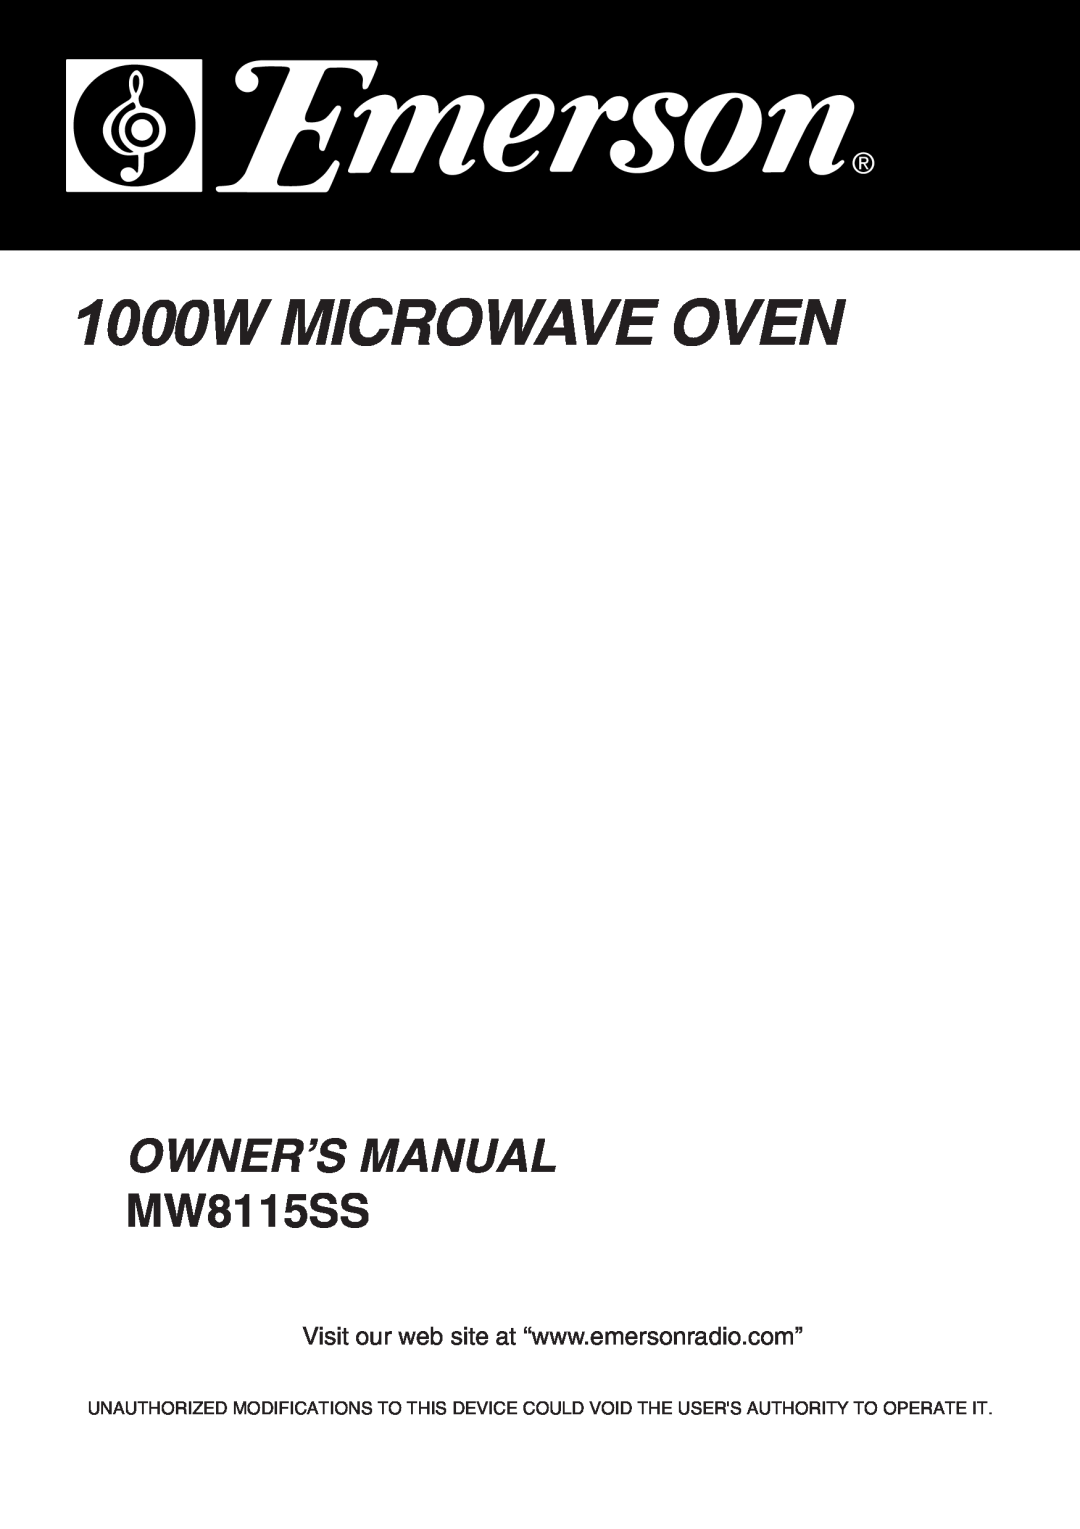 Emerson MW8115SS owner manual 1000W MICROWAVE OVEN, Owner’S Manual 